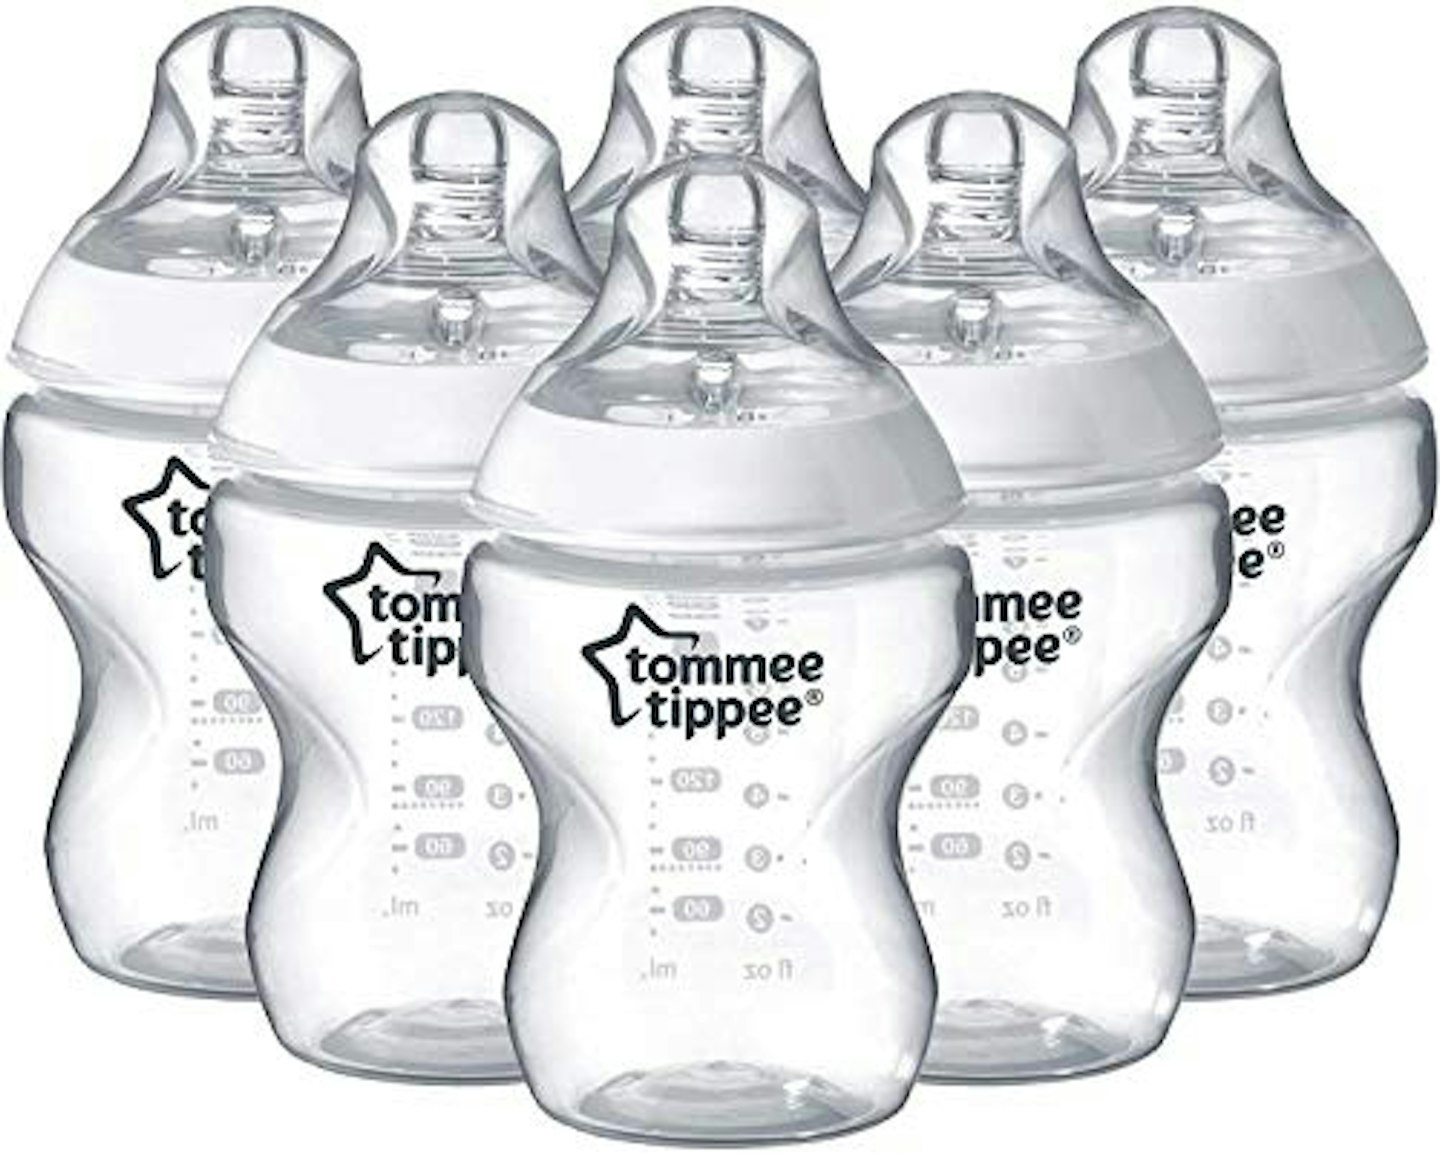 The 9 best baby bottles for breastfed babies 2023